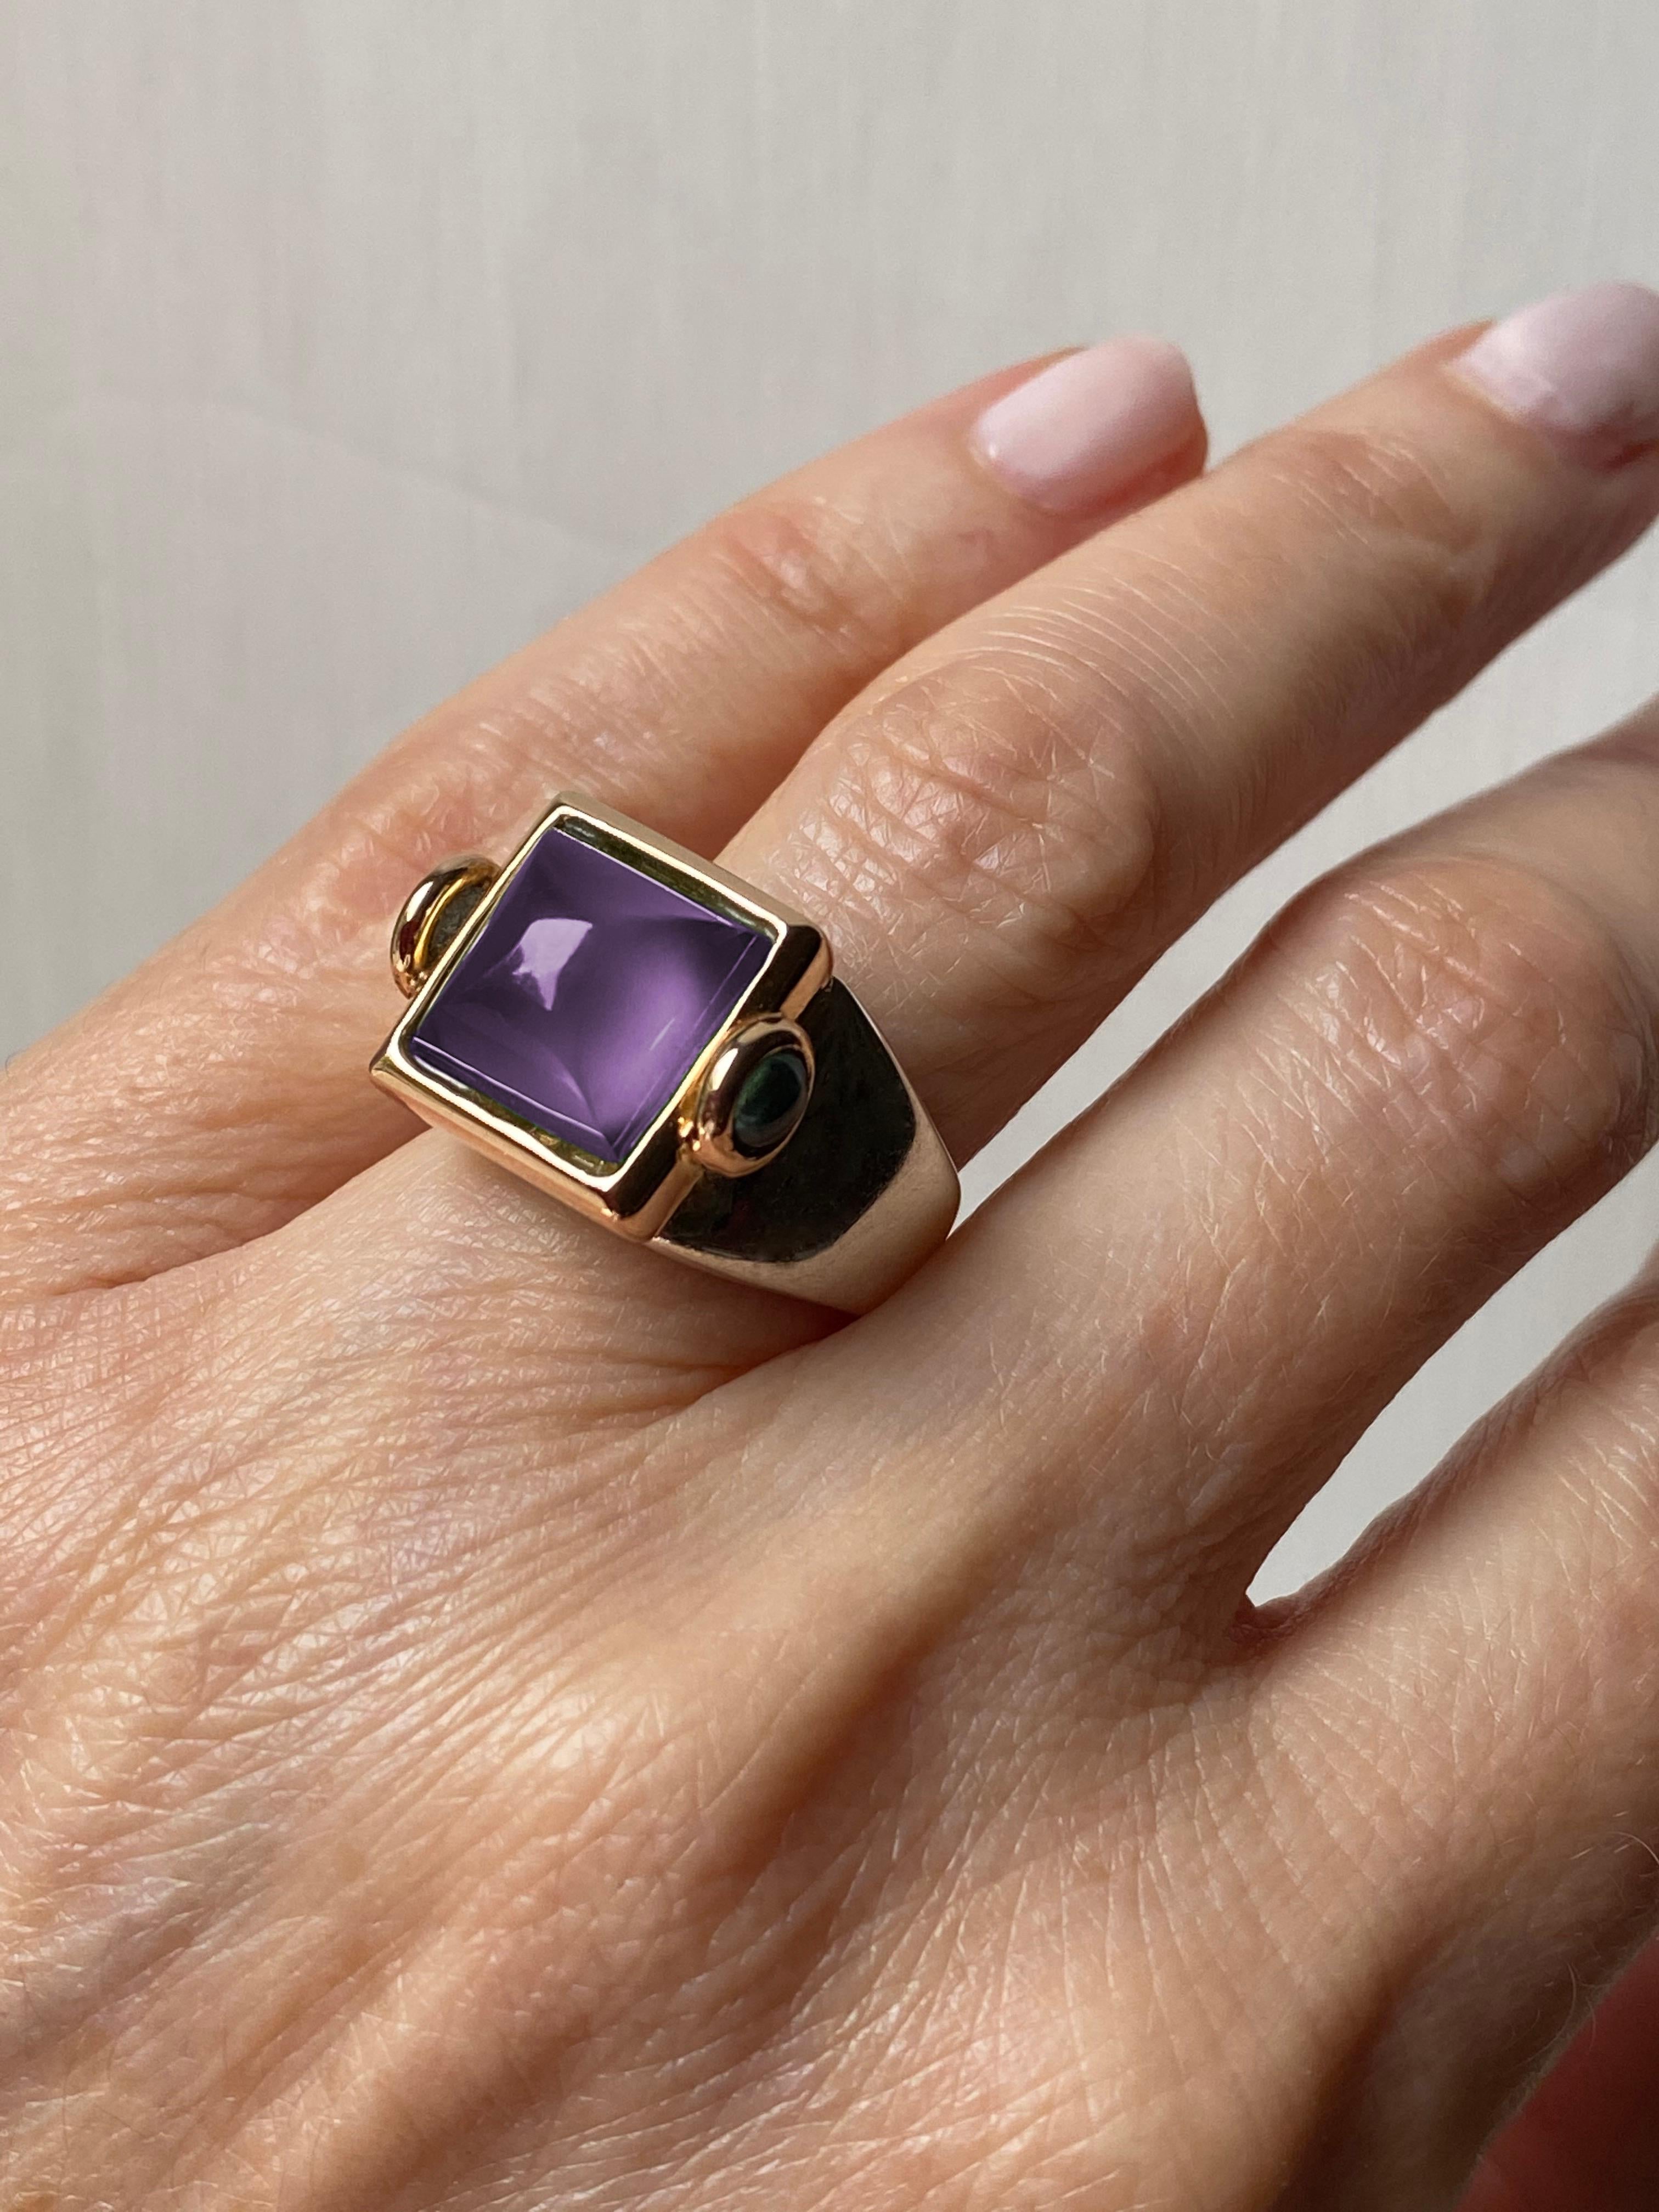 18 Karats Rose & White Gold Pyramid Cut Amethyst Green Tourmaline Design Ring 
The bezel is available also in 18 Karats yellow gold.
A beautiful cocktail ring handcrafted in 18 karats rose and white gold and embellished with an amethyst and two